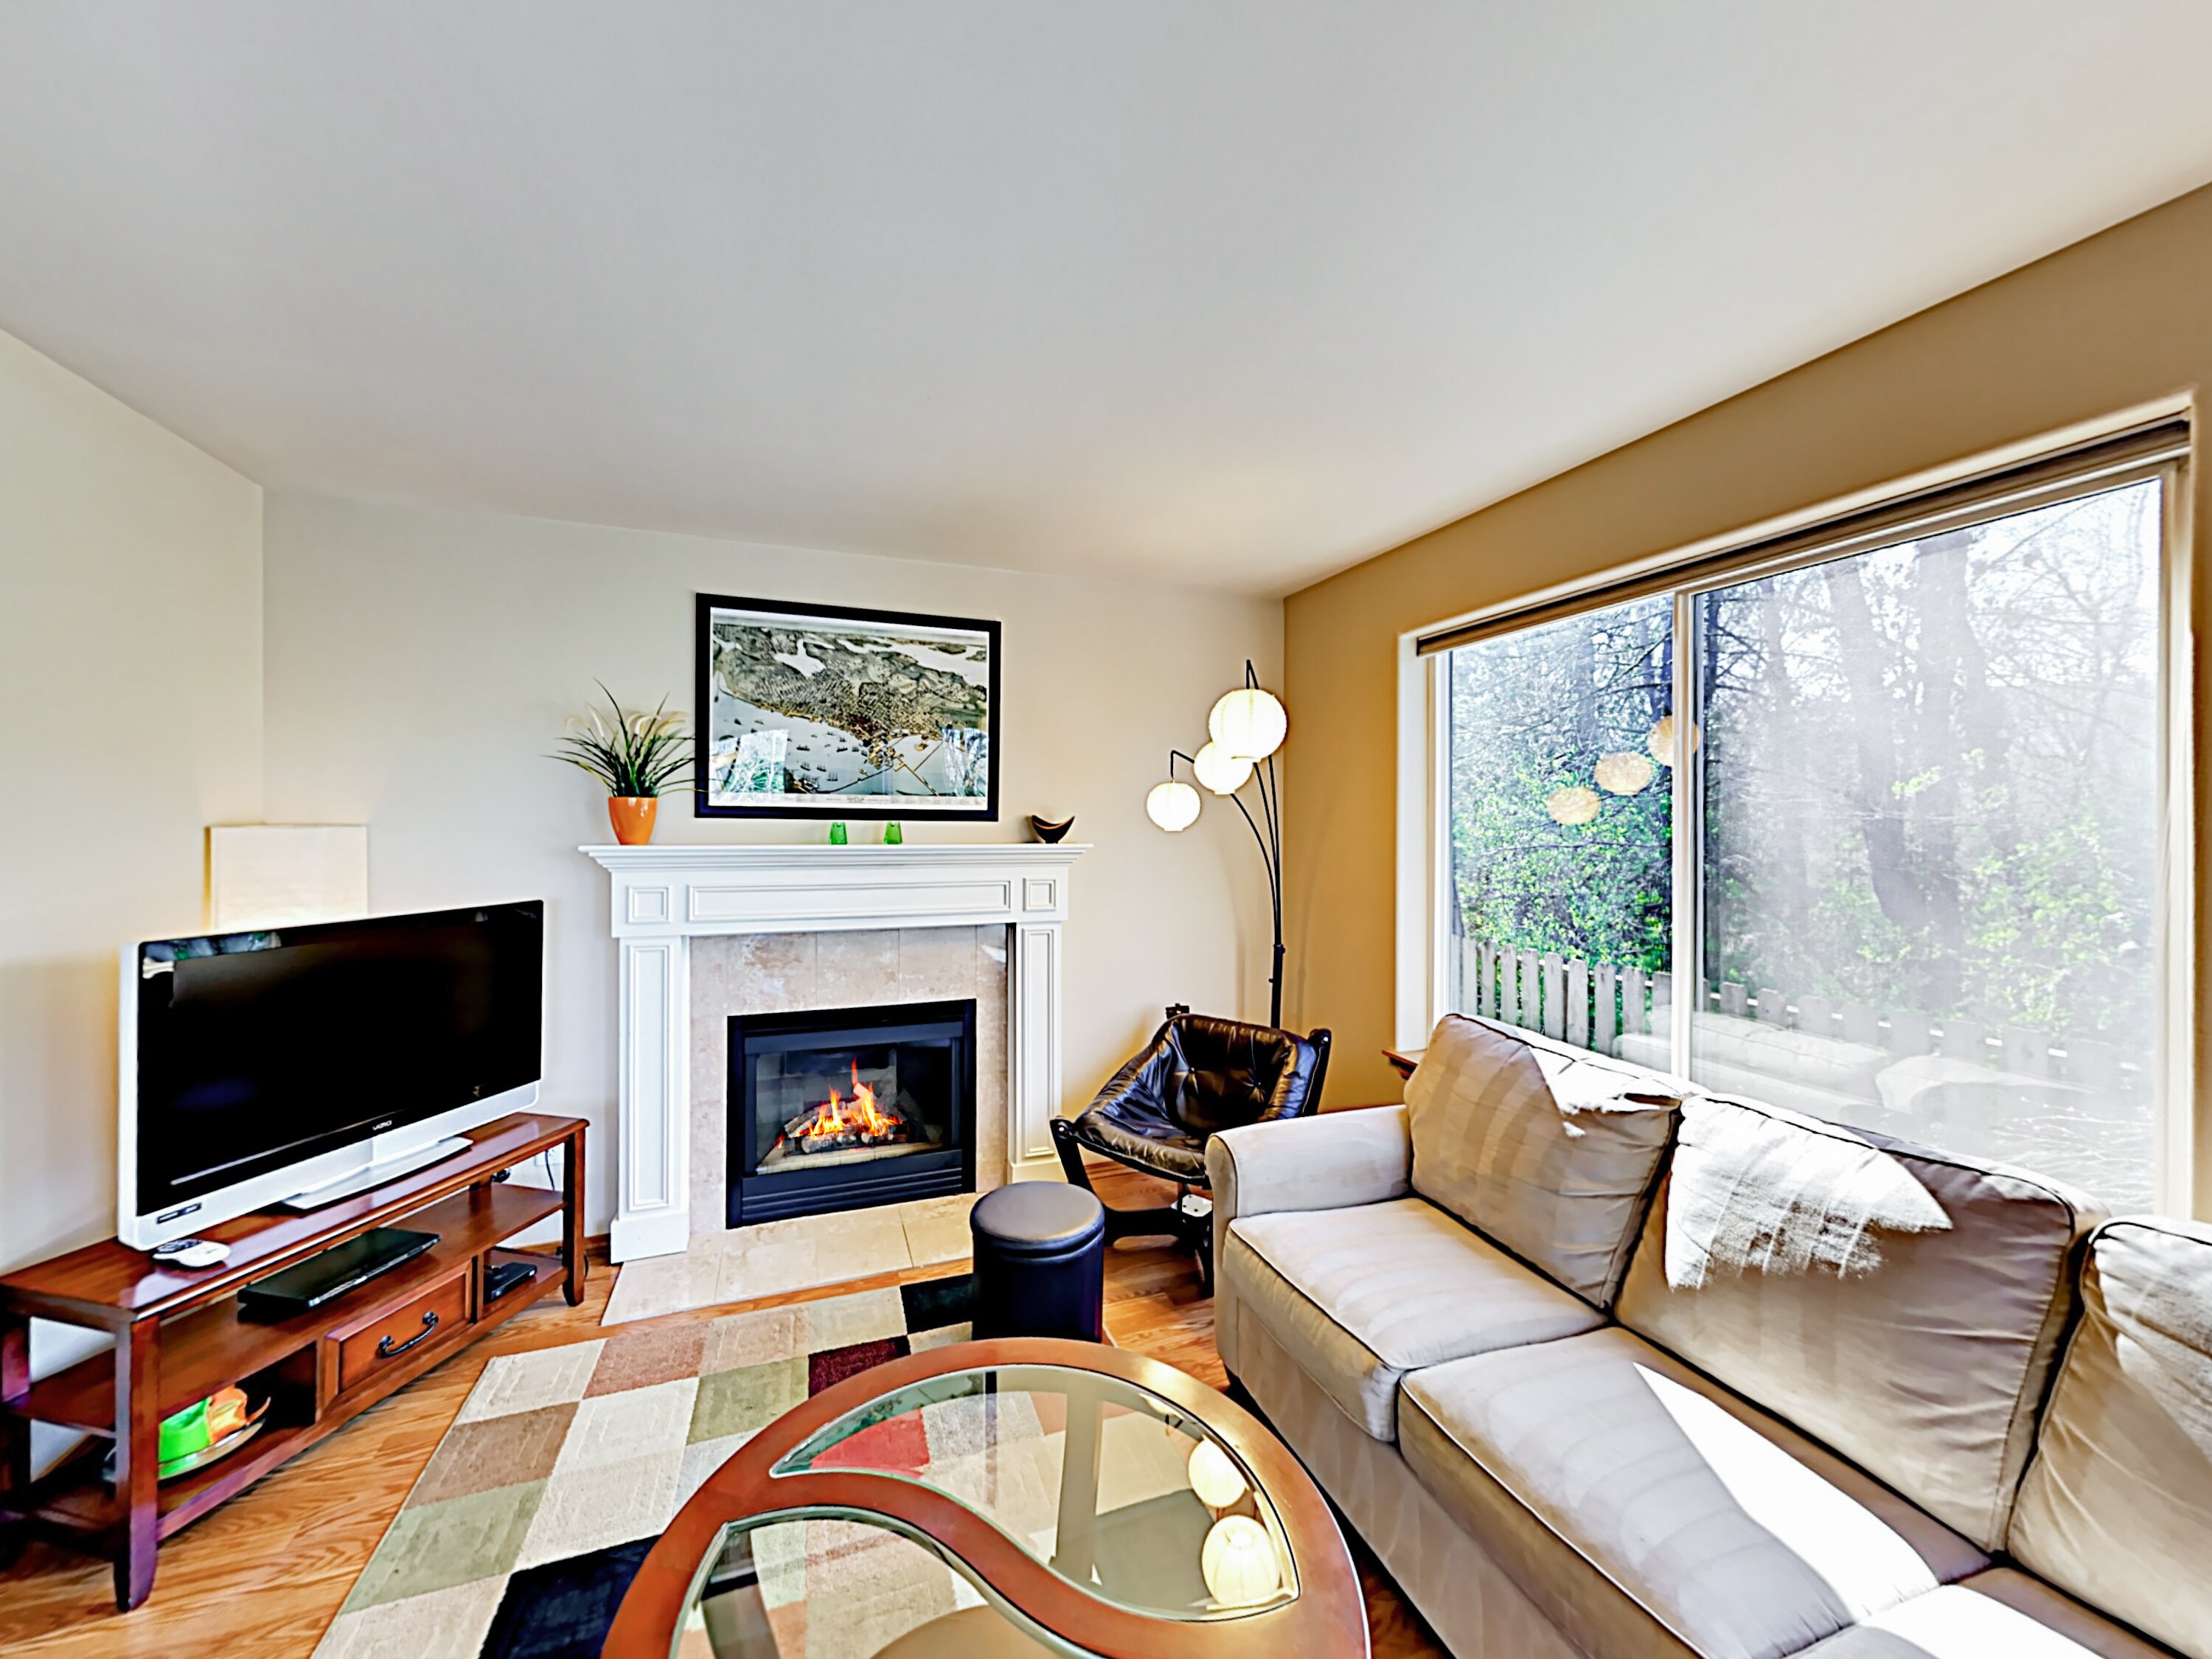 Welcome to Seattle! This townhouse is professionally managed by TurnKey Vacation Rentals.